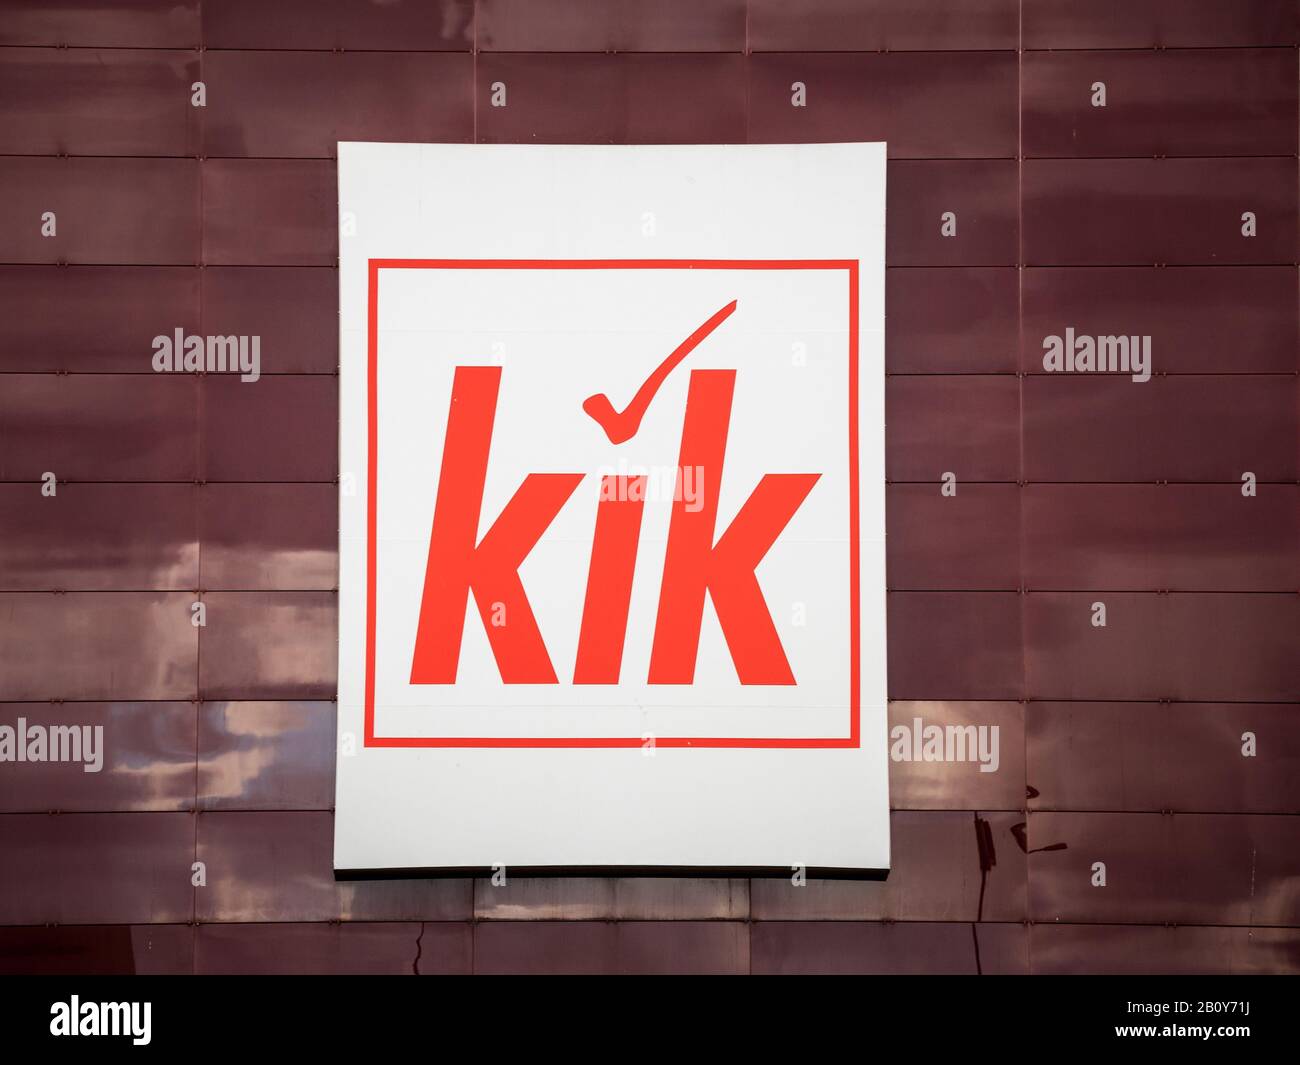 BRNO, CZECHIA - NOVEMBER 5, 2019: Kik Textil logo in front of their store for Brno. Kik, or Kunde Ist Konig Textilien, is a German discount clothing a Stock Photo